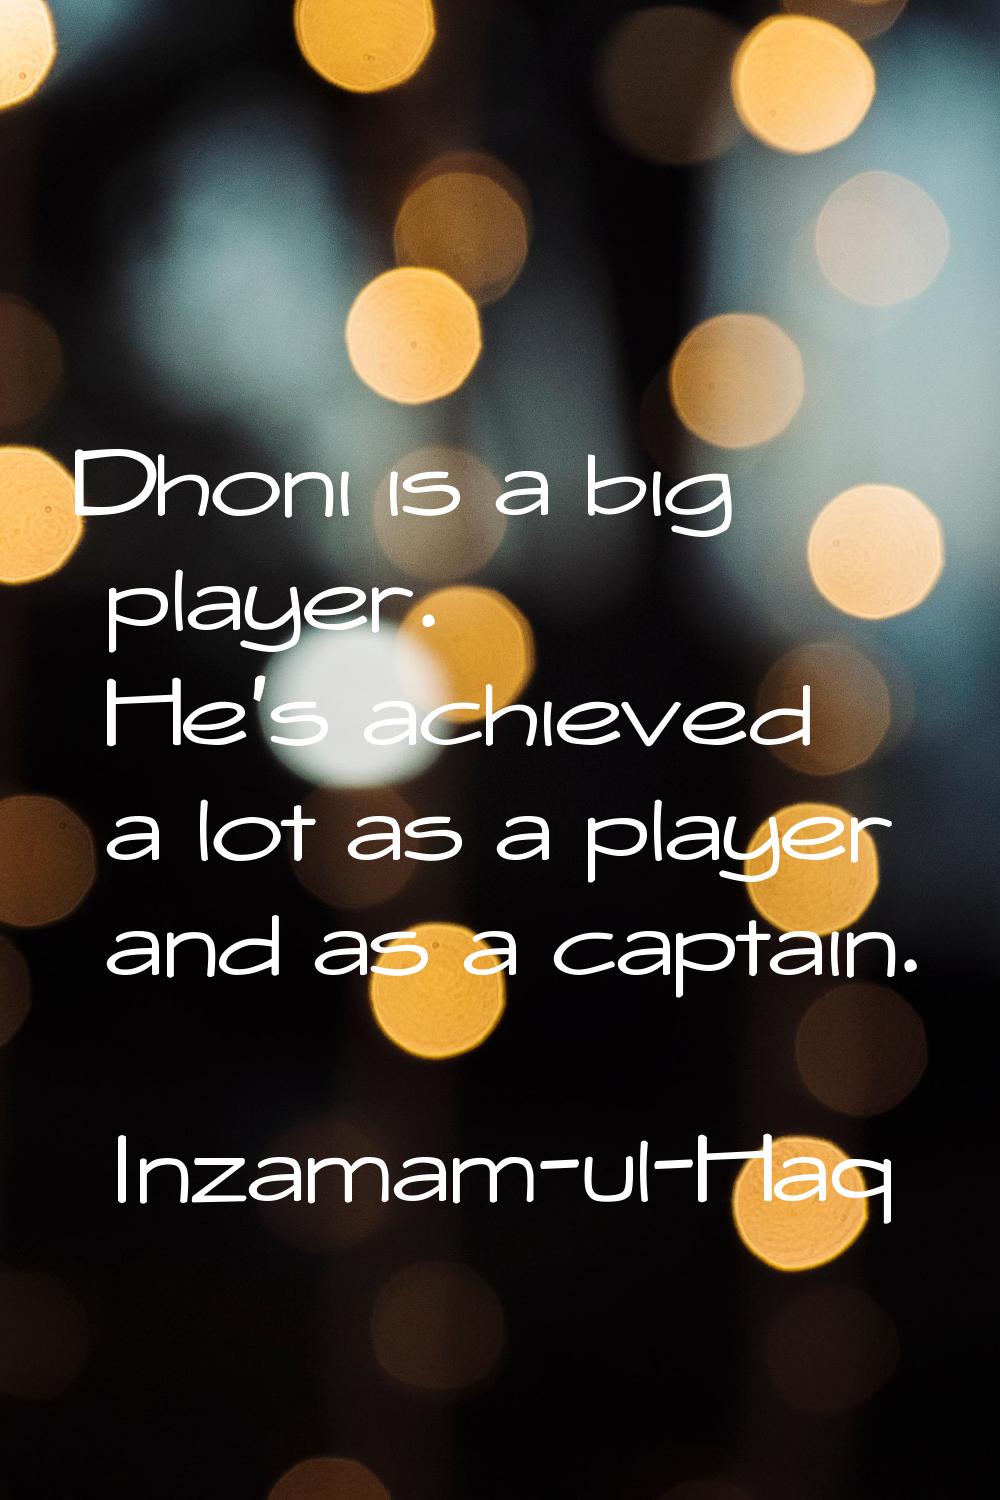 Dhoni is a big player. He's achieved a lot as a player and as a captain.